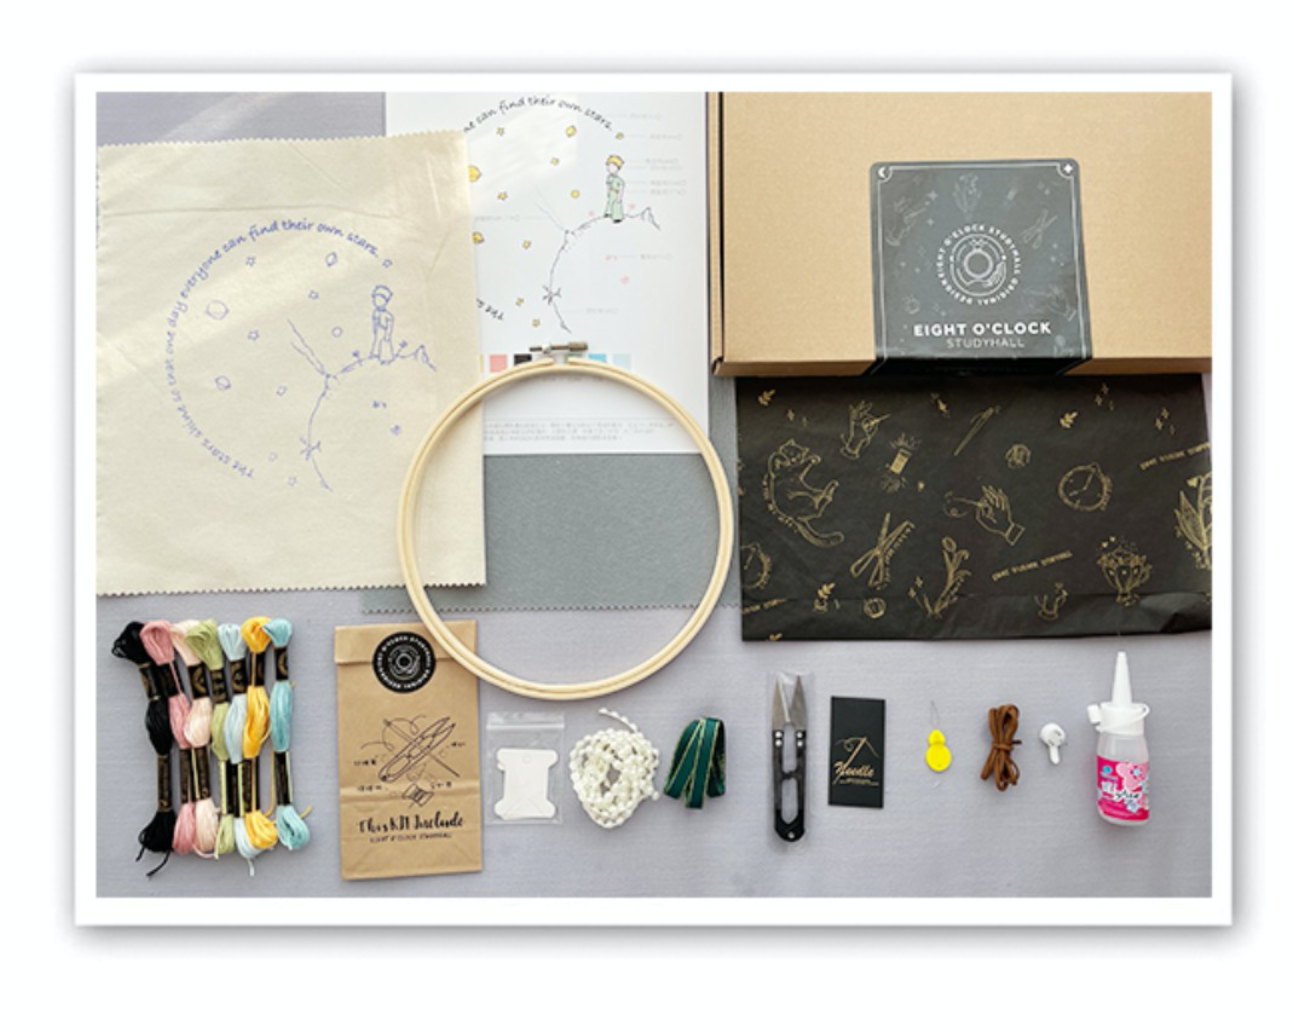 DIY 《The Little Prince》 Embroidery Craft Kit. Embroidery Beginner Kit 02